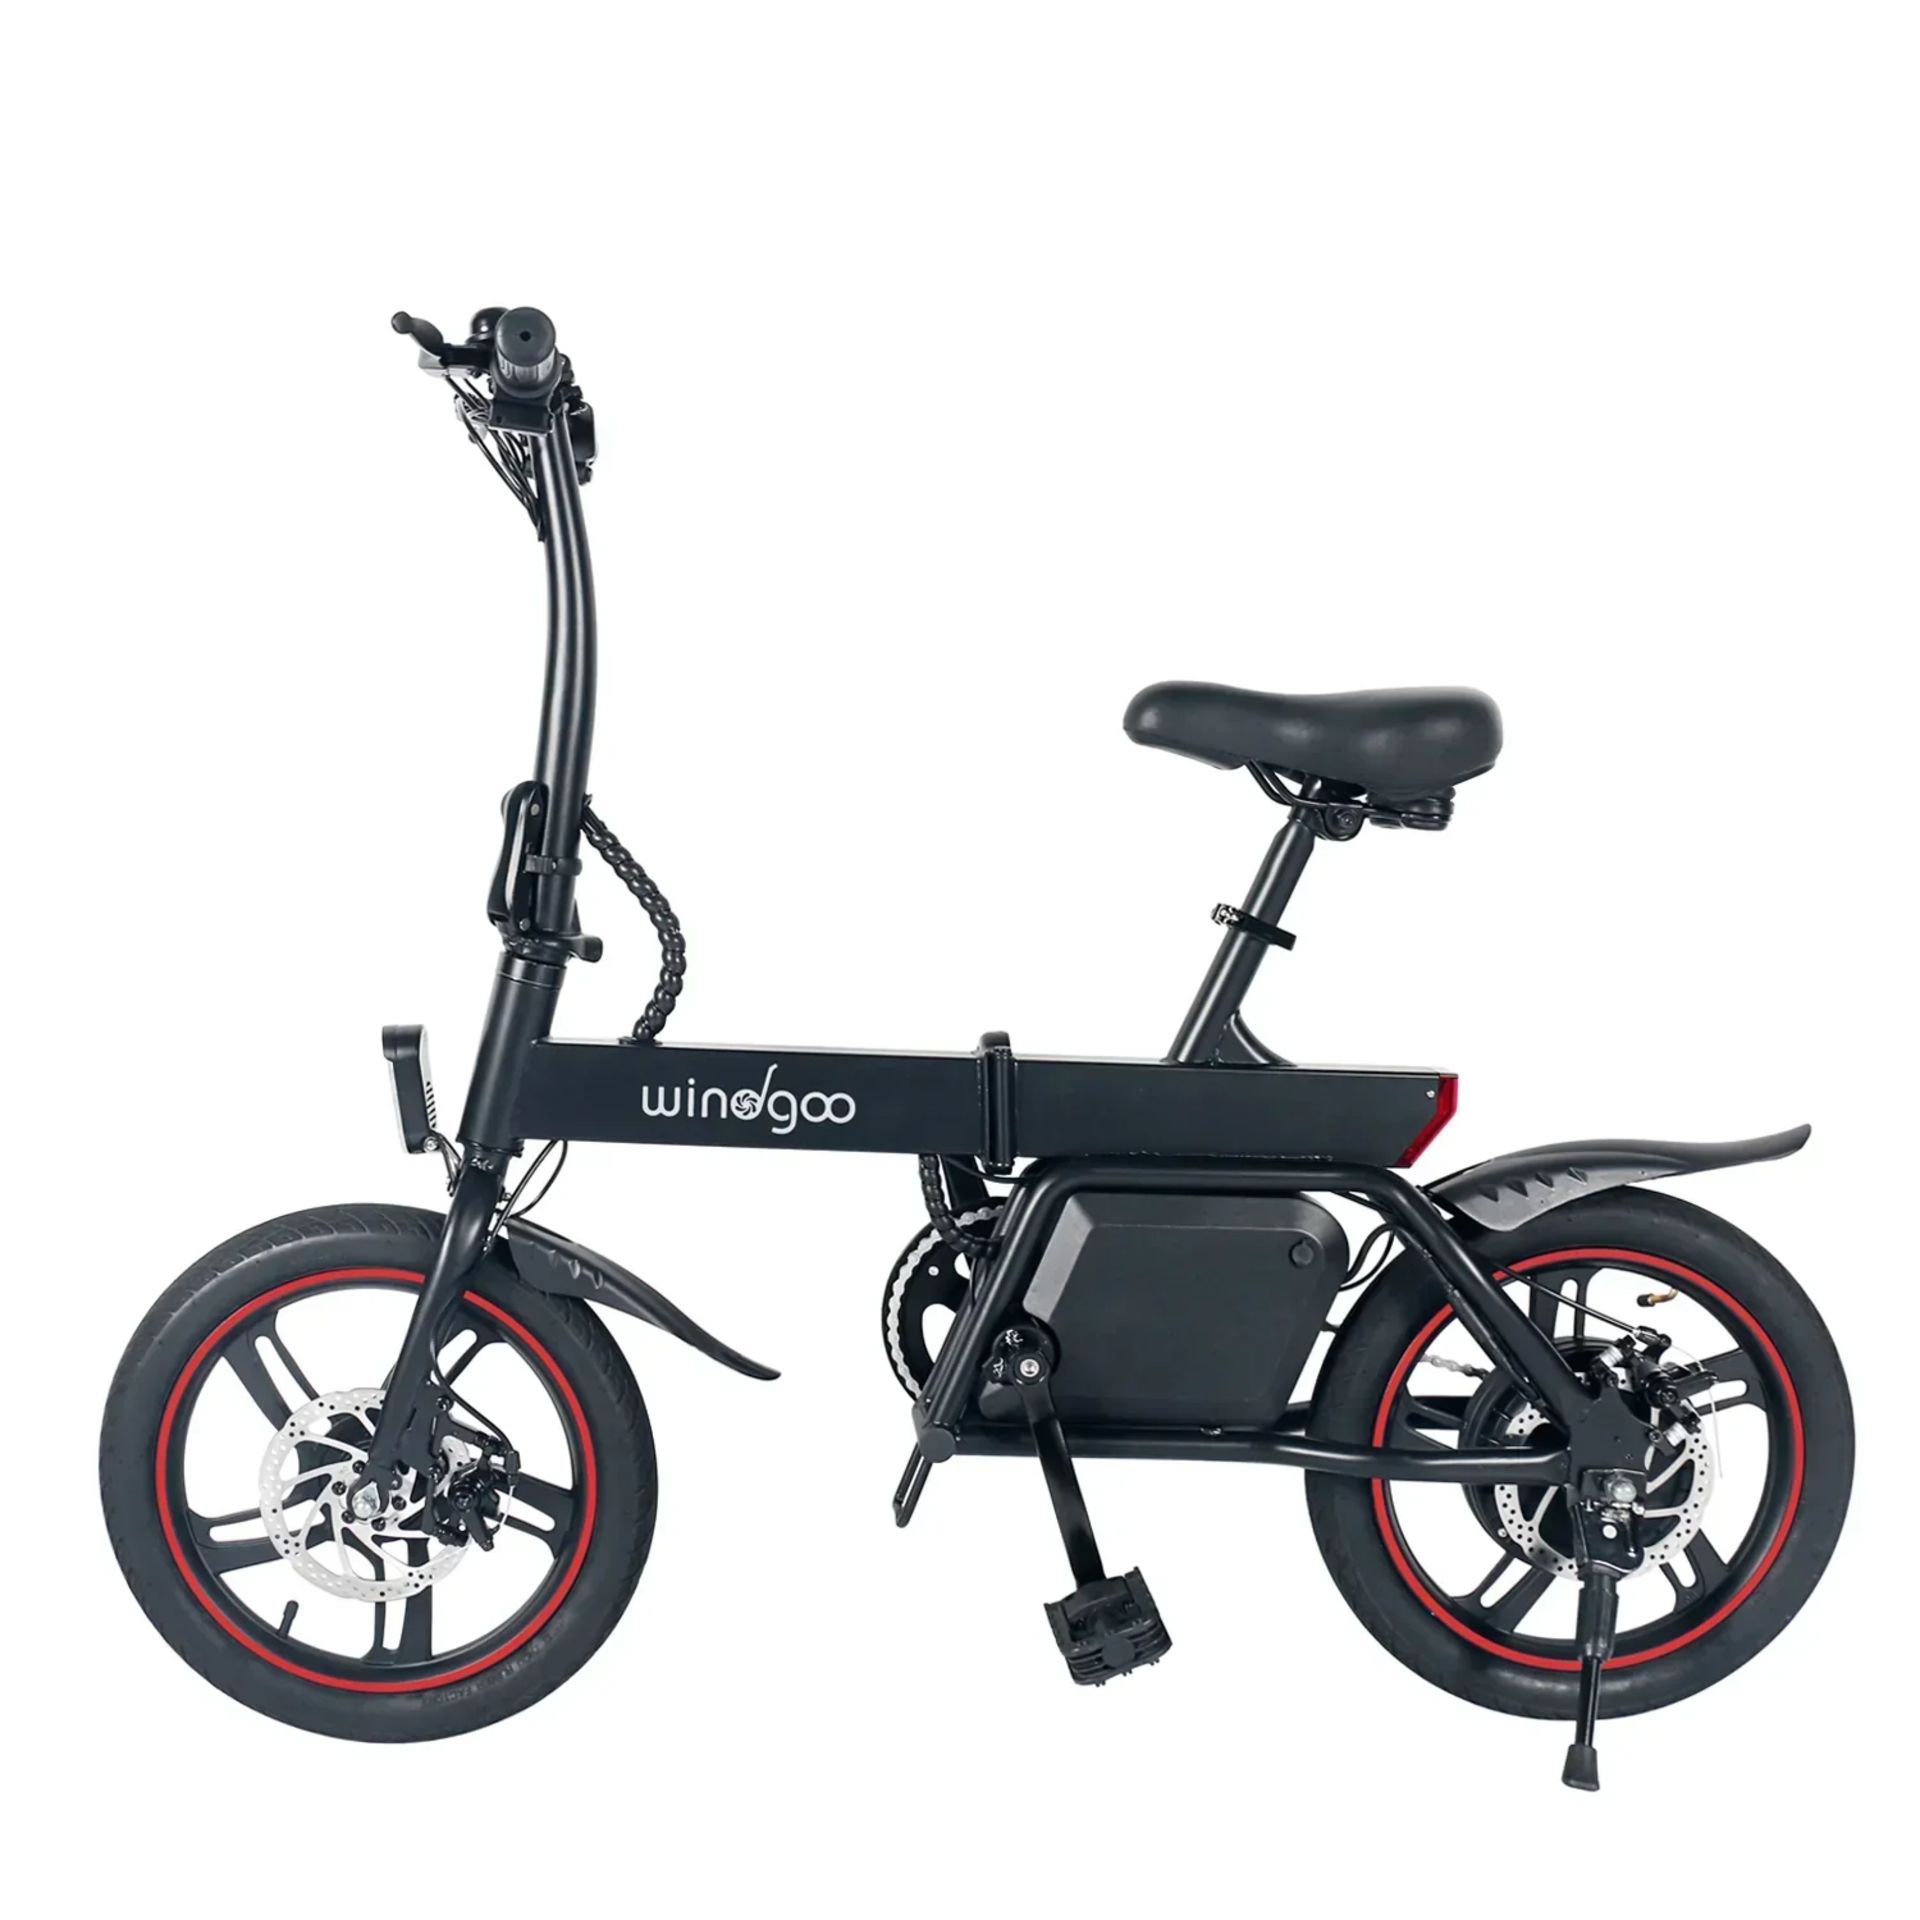 5 X Windgoo B20 Pro Electric Bike. RRP £1,100.99. With 16-inch-wide tires and a frame of upgraded - Image 2 of 7